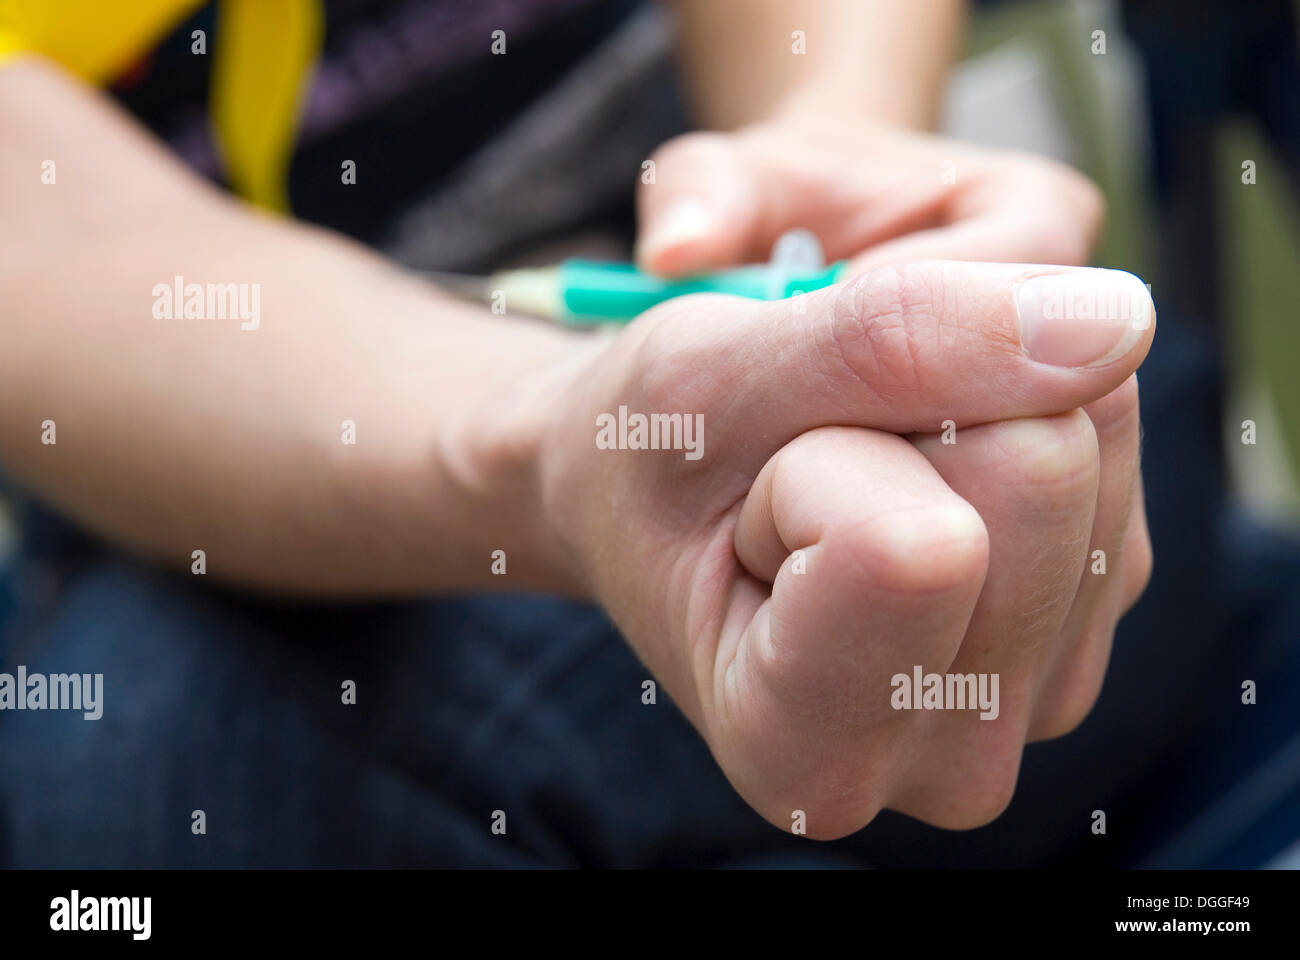 A syringe is being administered Stock Photo